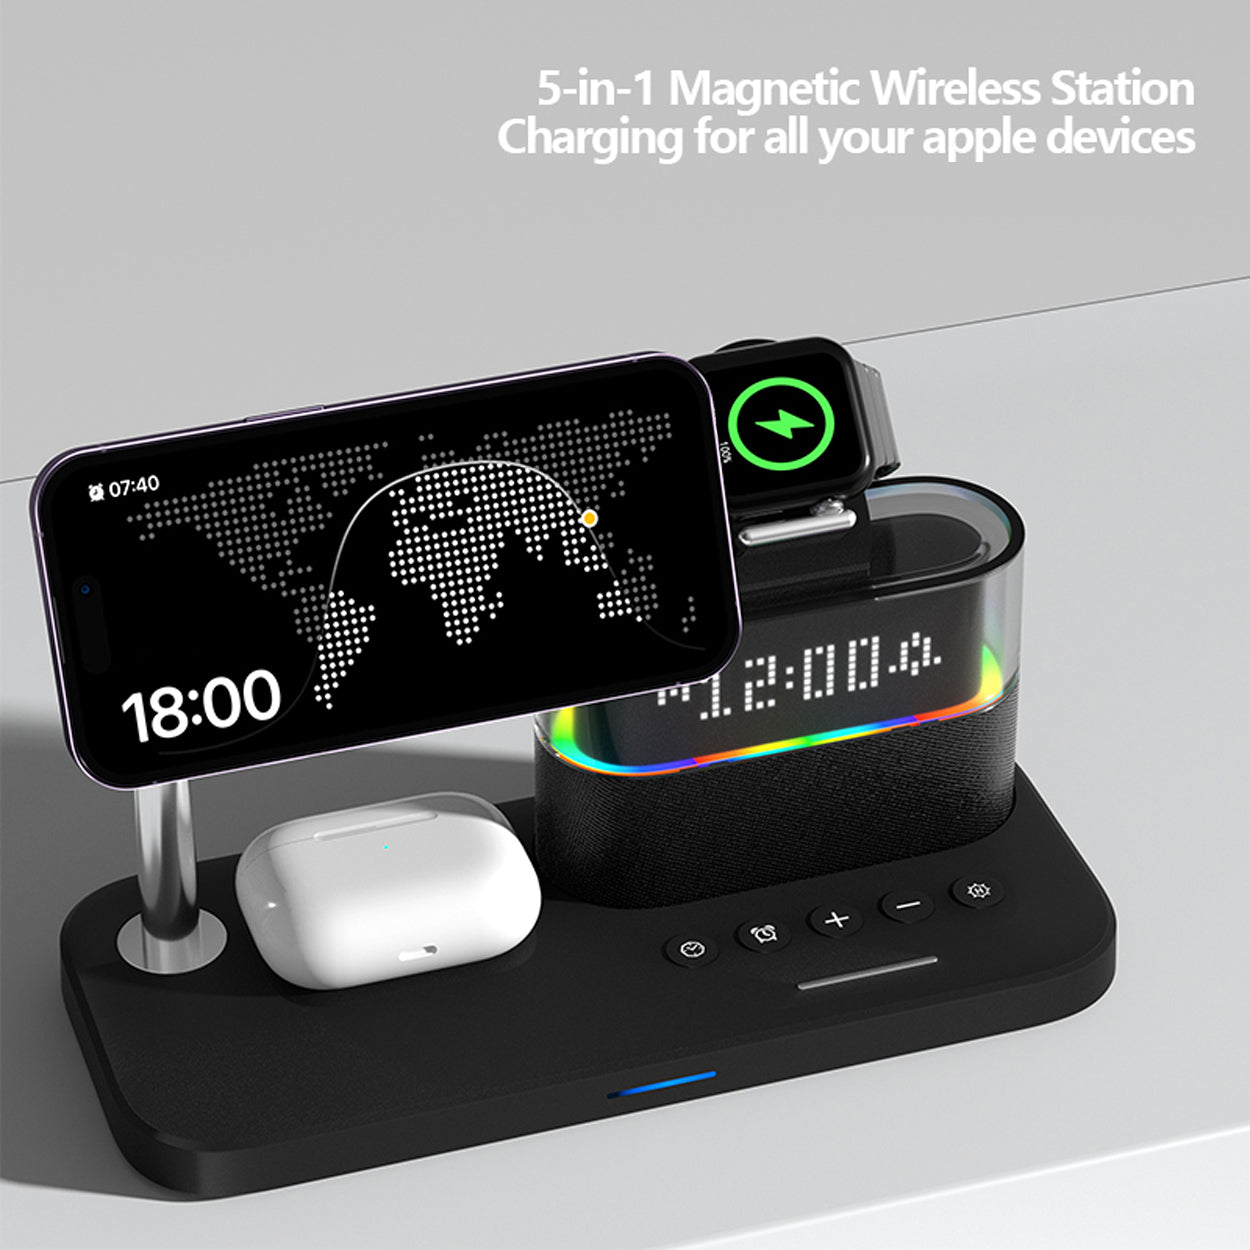 3-in-1 Magnetic Wireless Charging Station with Alarm Clock - 3